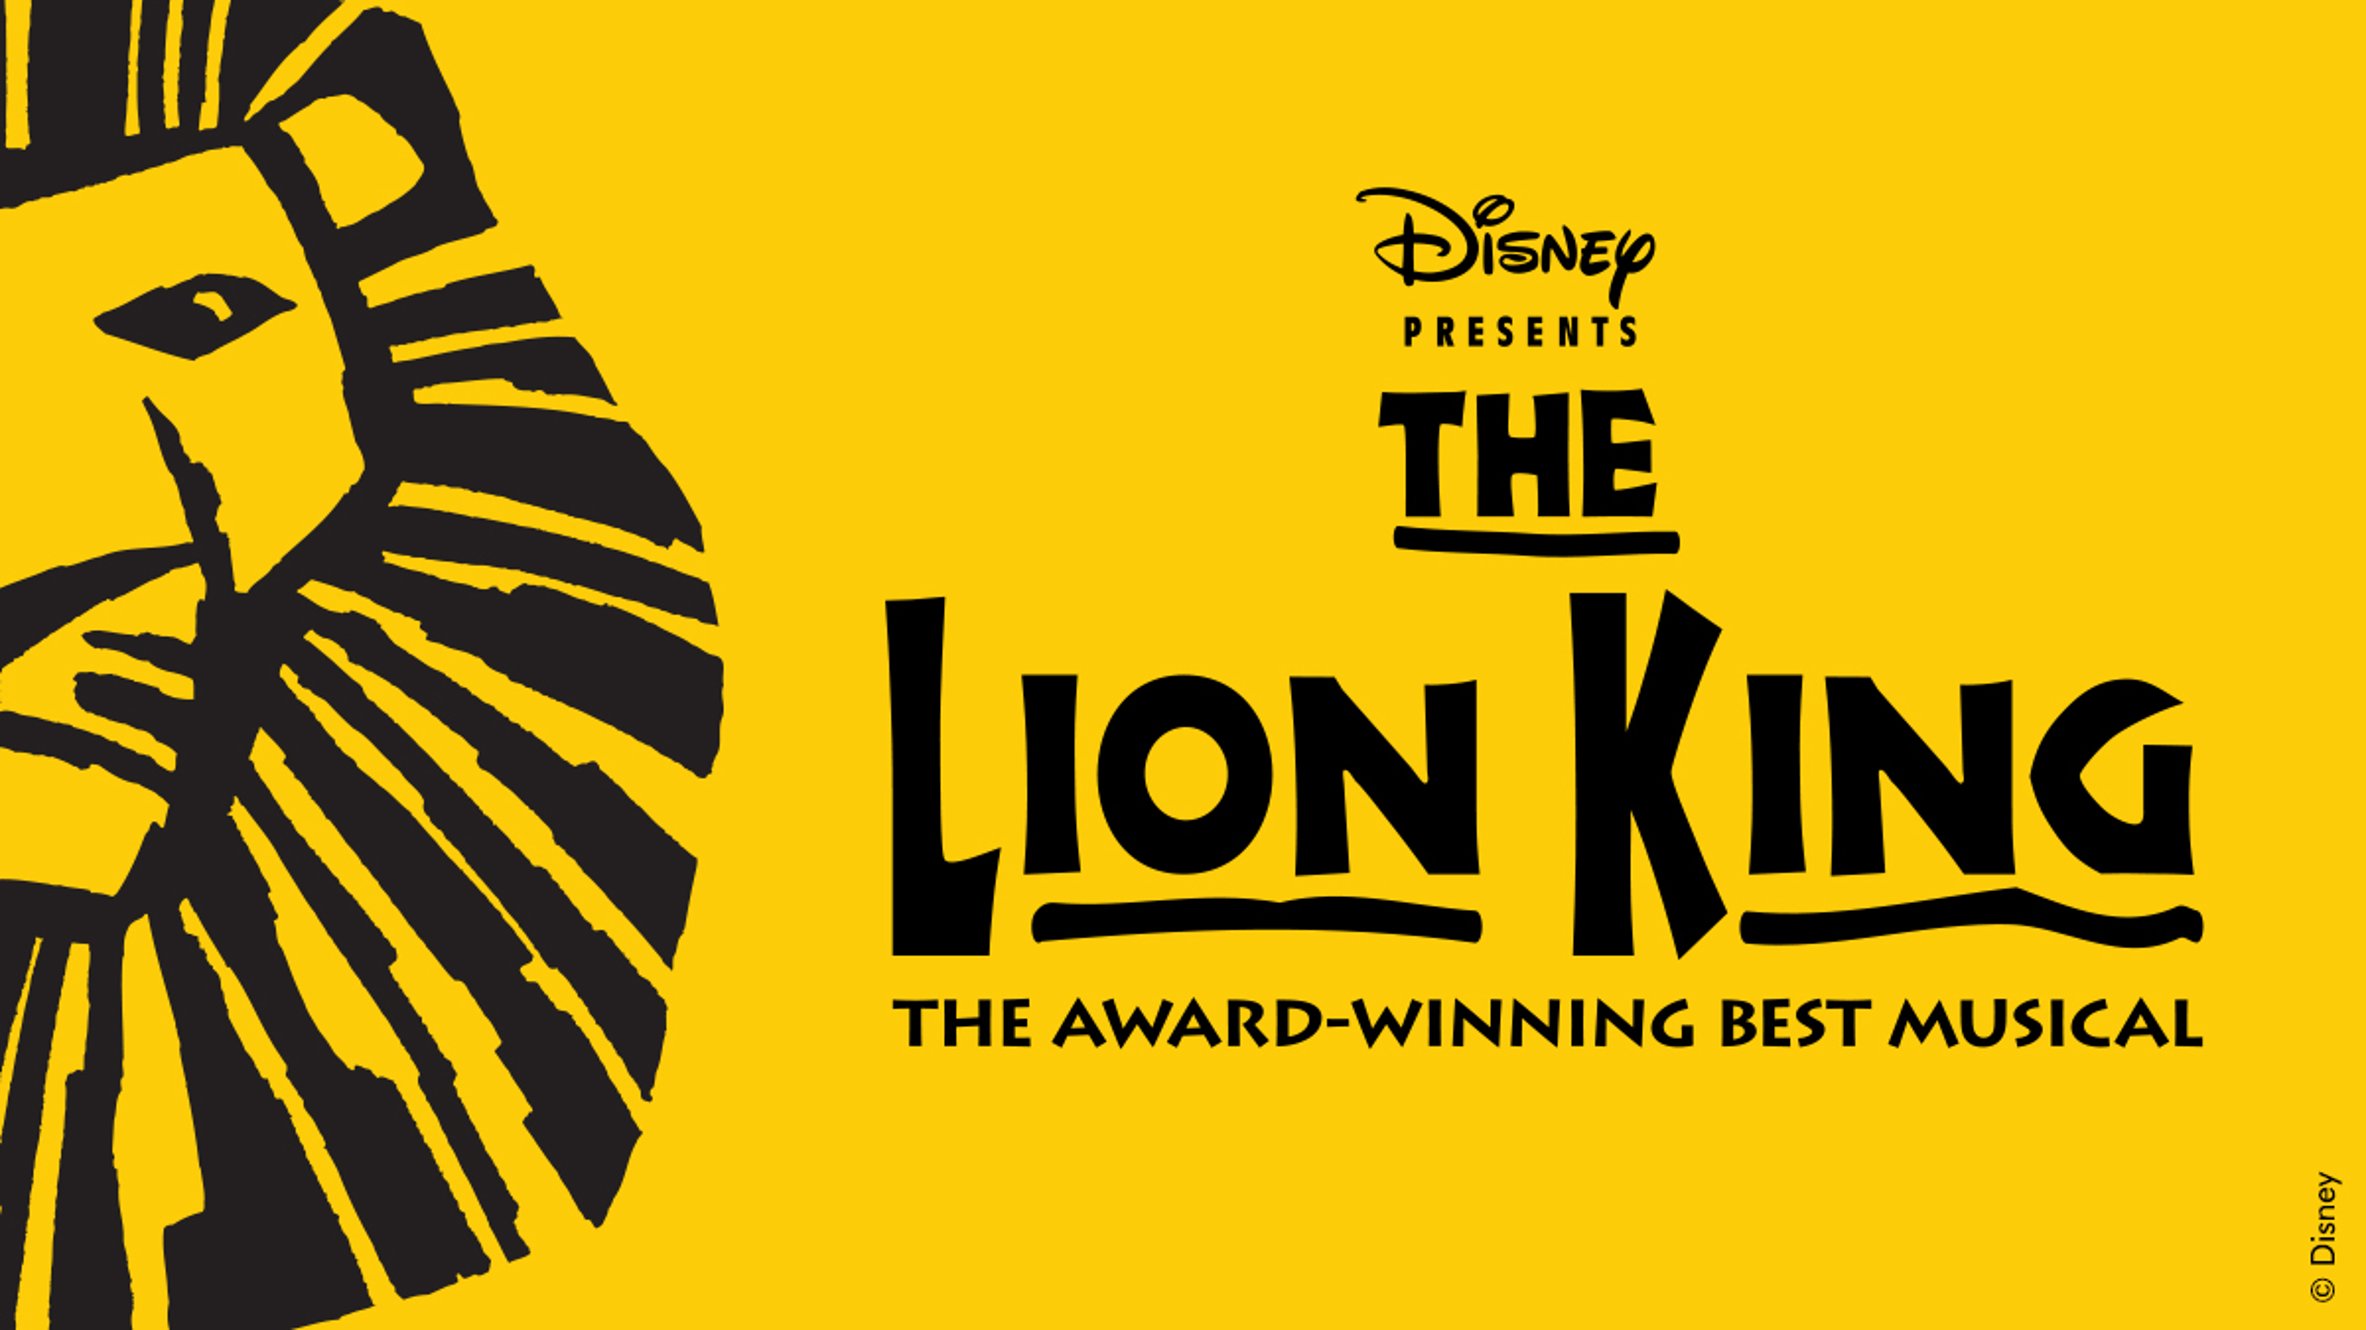 Casting Lead Roes For Disney's The Lion King Broadway!